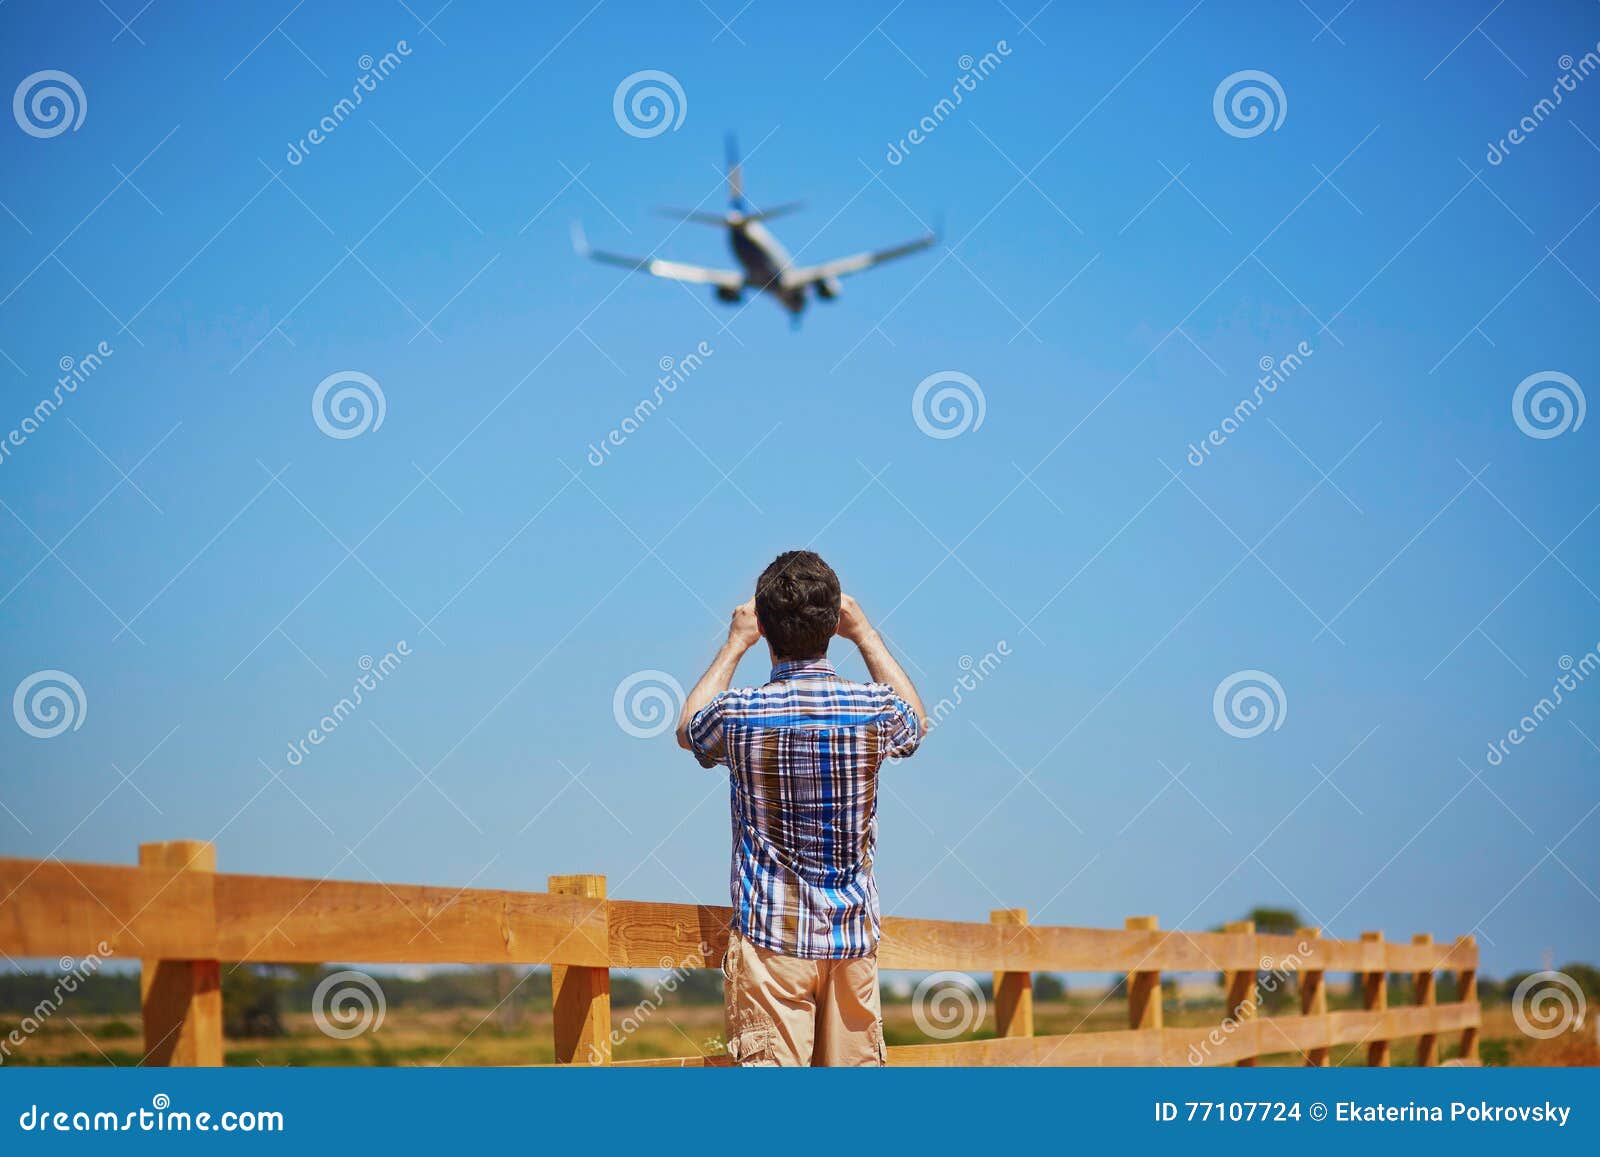 man is looking at the glide path and landing plane